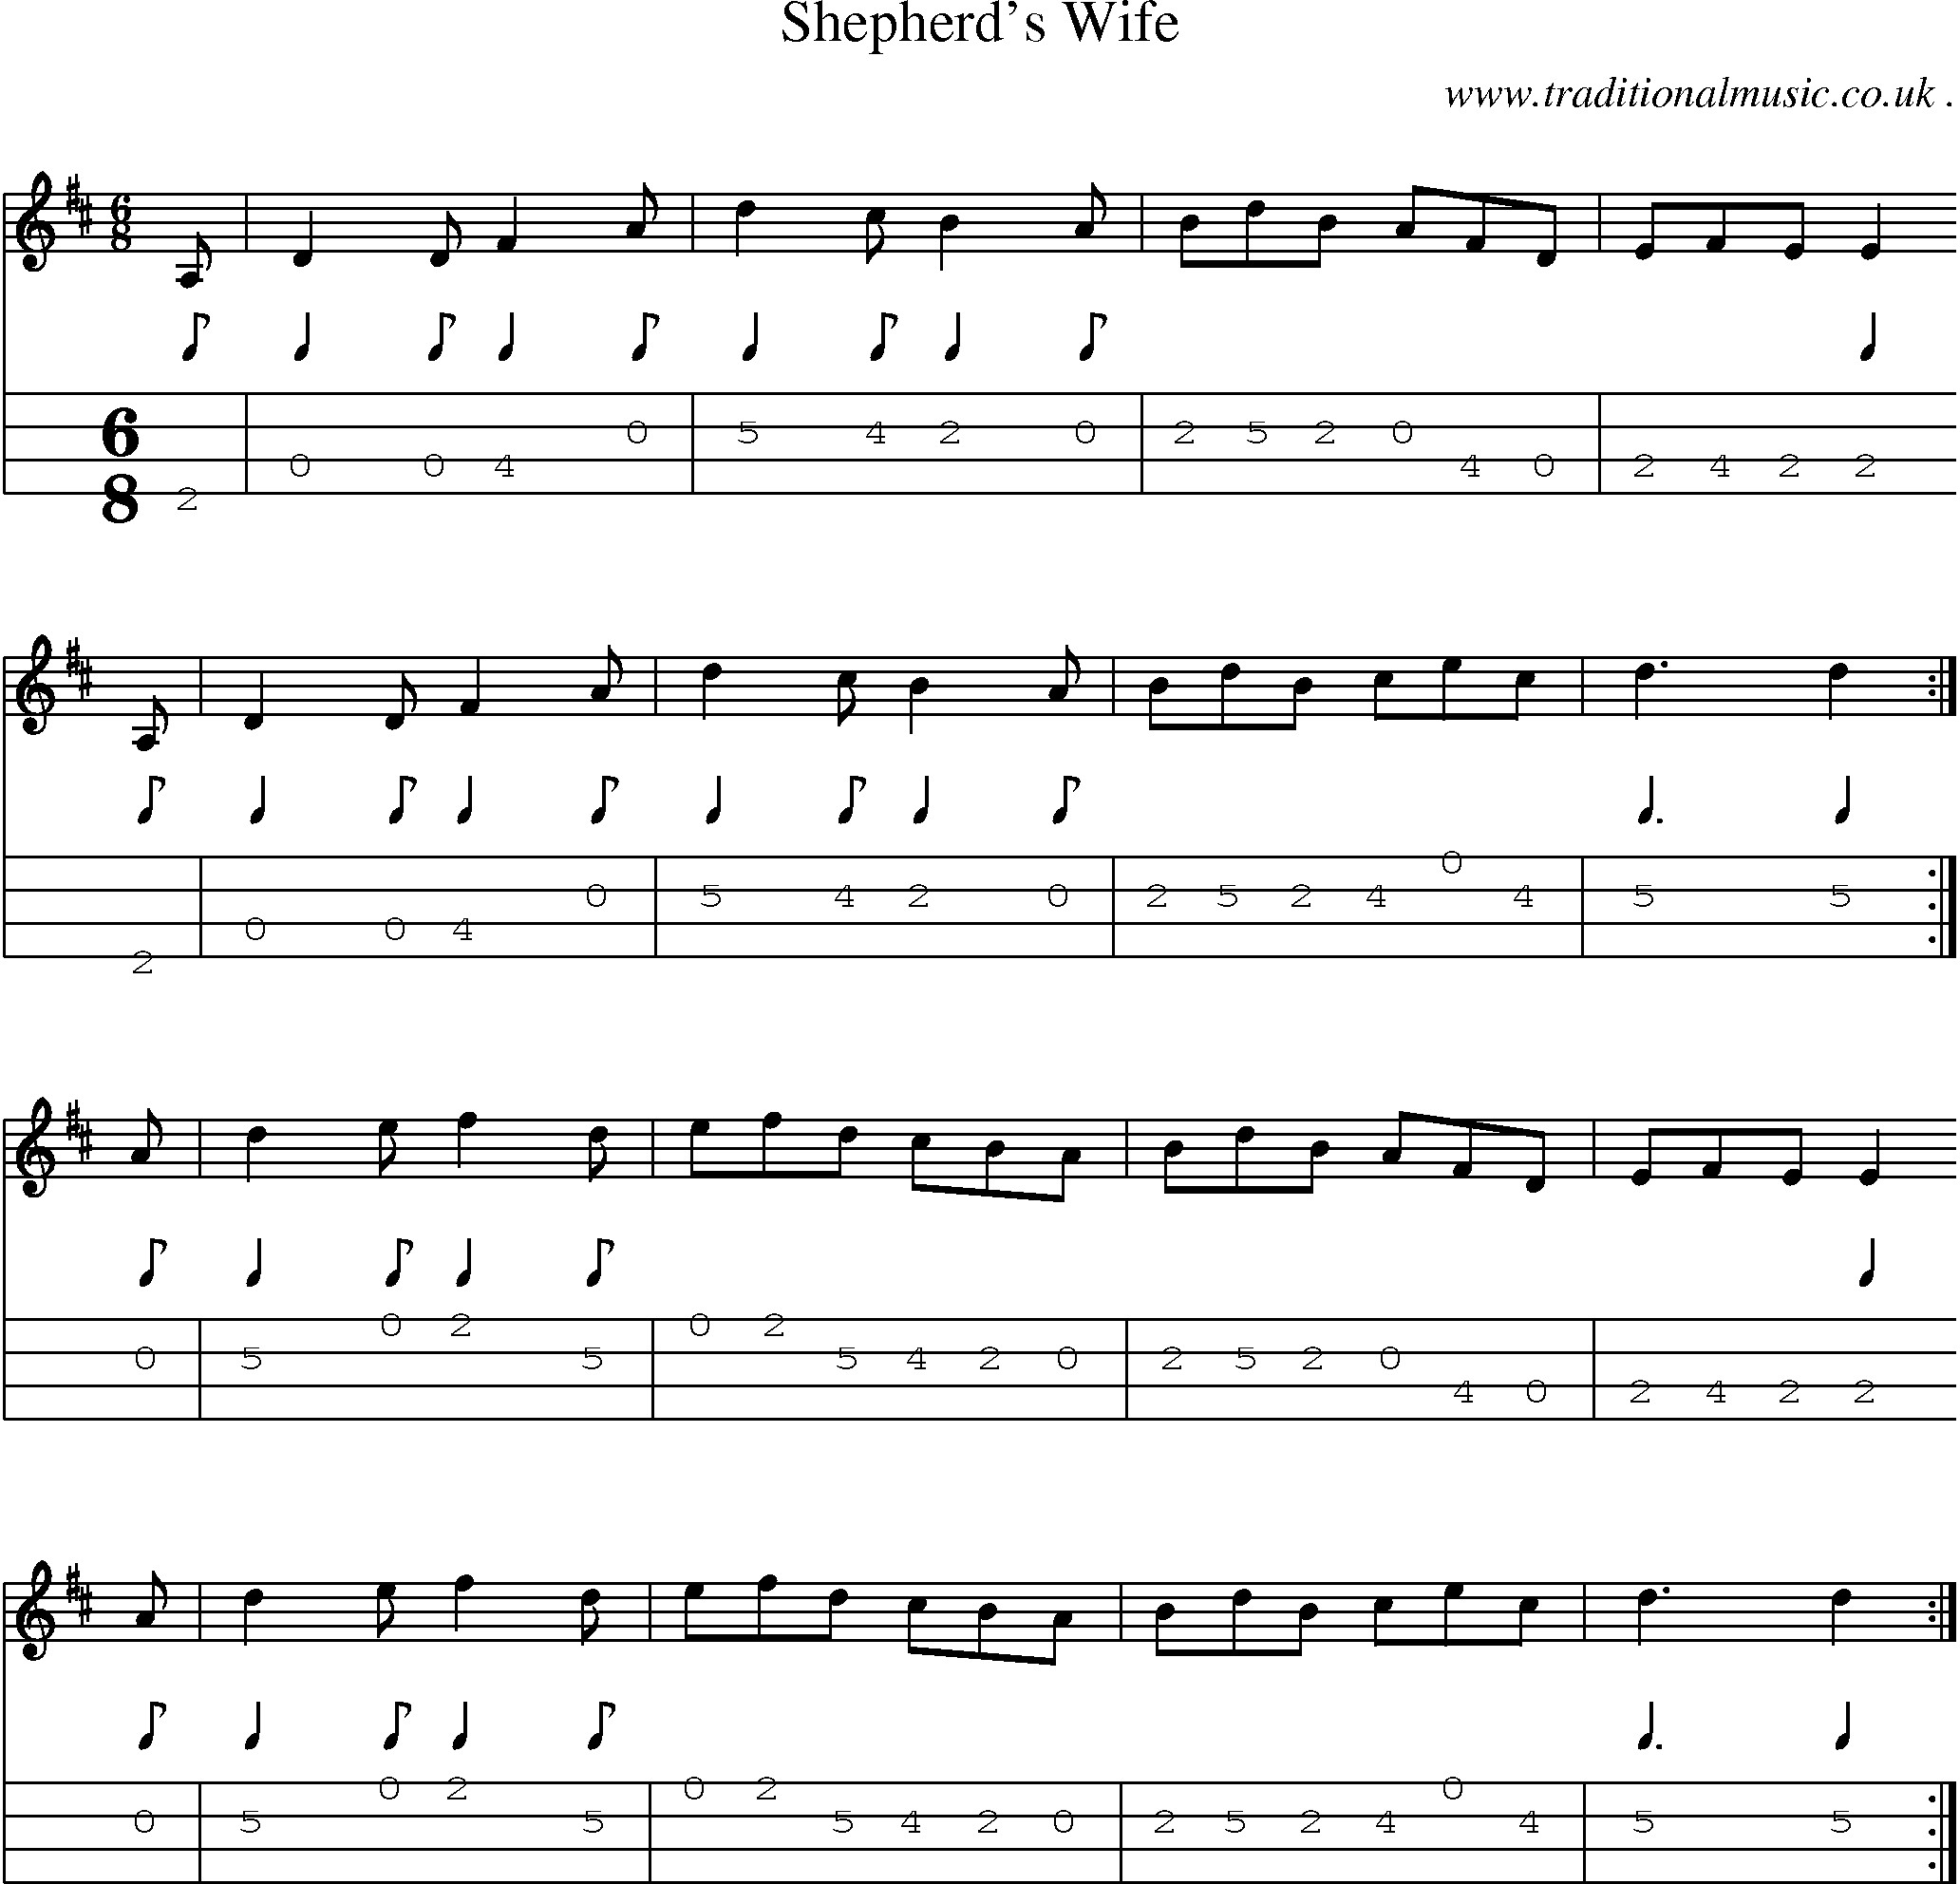 Sheet-music  score, Chords and Mandolin Tabs for Shepherds Wife